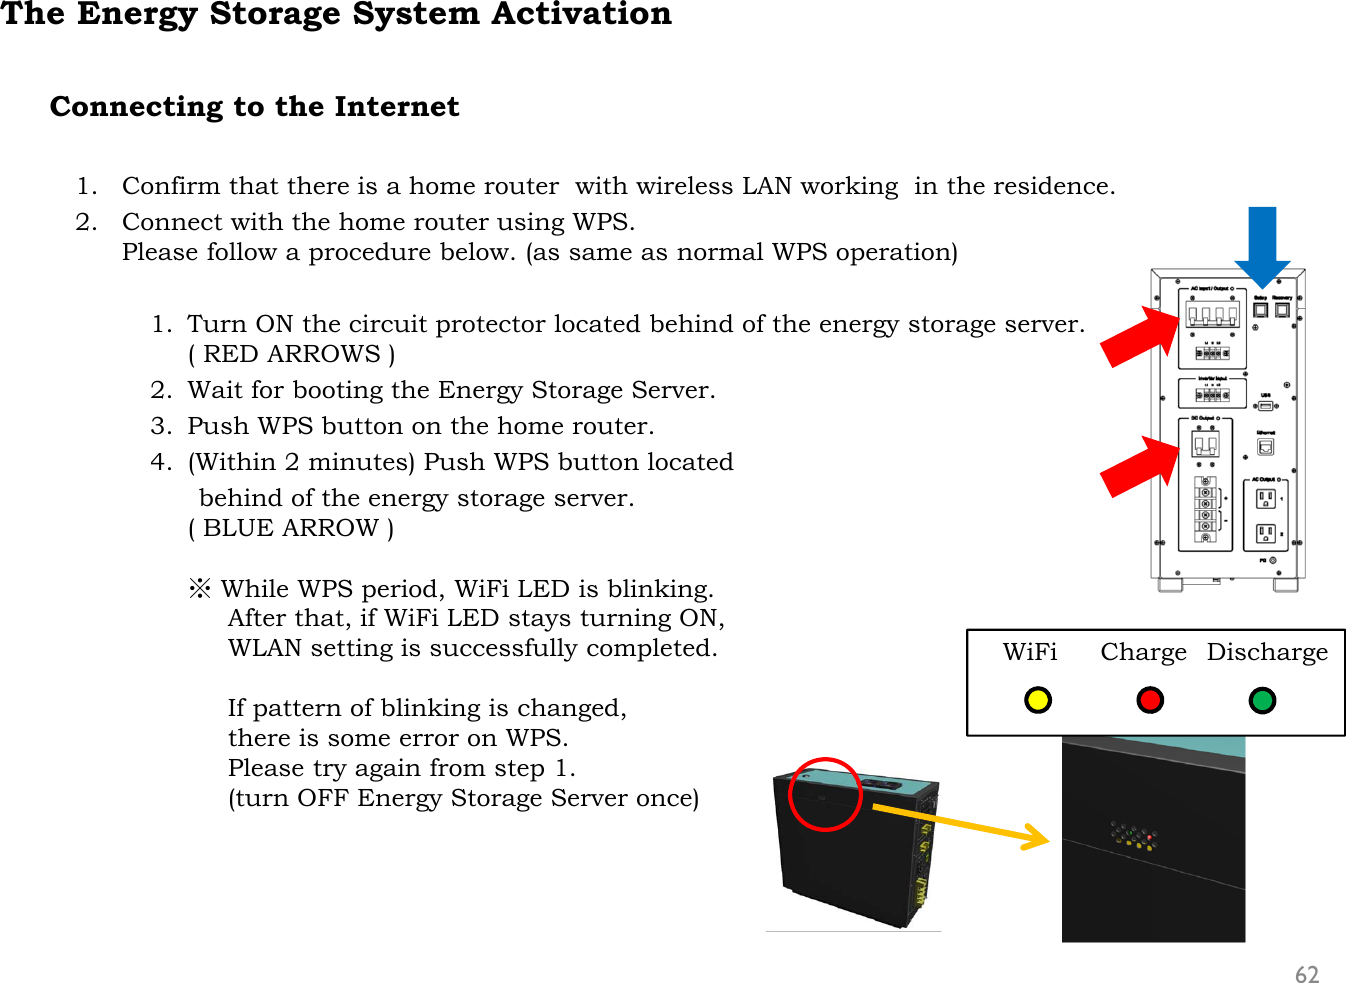 The Energy Storage System ActivationConnecting to the Internet1. Confirm that there is a home router  with wireless LAN working  in the residence. 2. Connect with the home router using WPS.Please follow a procedure below. (as same as normal WPS operation)1. Turn ON the circuit protector located behind of the energy storage server.( RED ARROWS )2. Wait for booting the Energy Storage Server.3. Push WPS button on the home router.4. (Within 2 minutes) Push WPS button located behind of the energy storage server.( BLUE ARROW )※While WPS period, WiFi LED is blinking.After that, if WiFi LED stays turning ON, WLAN setting is successfully completed.If pattern of blinking is changed,there is some error on WPS.Please try again from step 1.(turn OFF Energy Storage Server once)62WiFi Charge Discharge